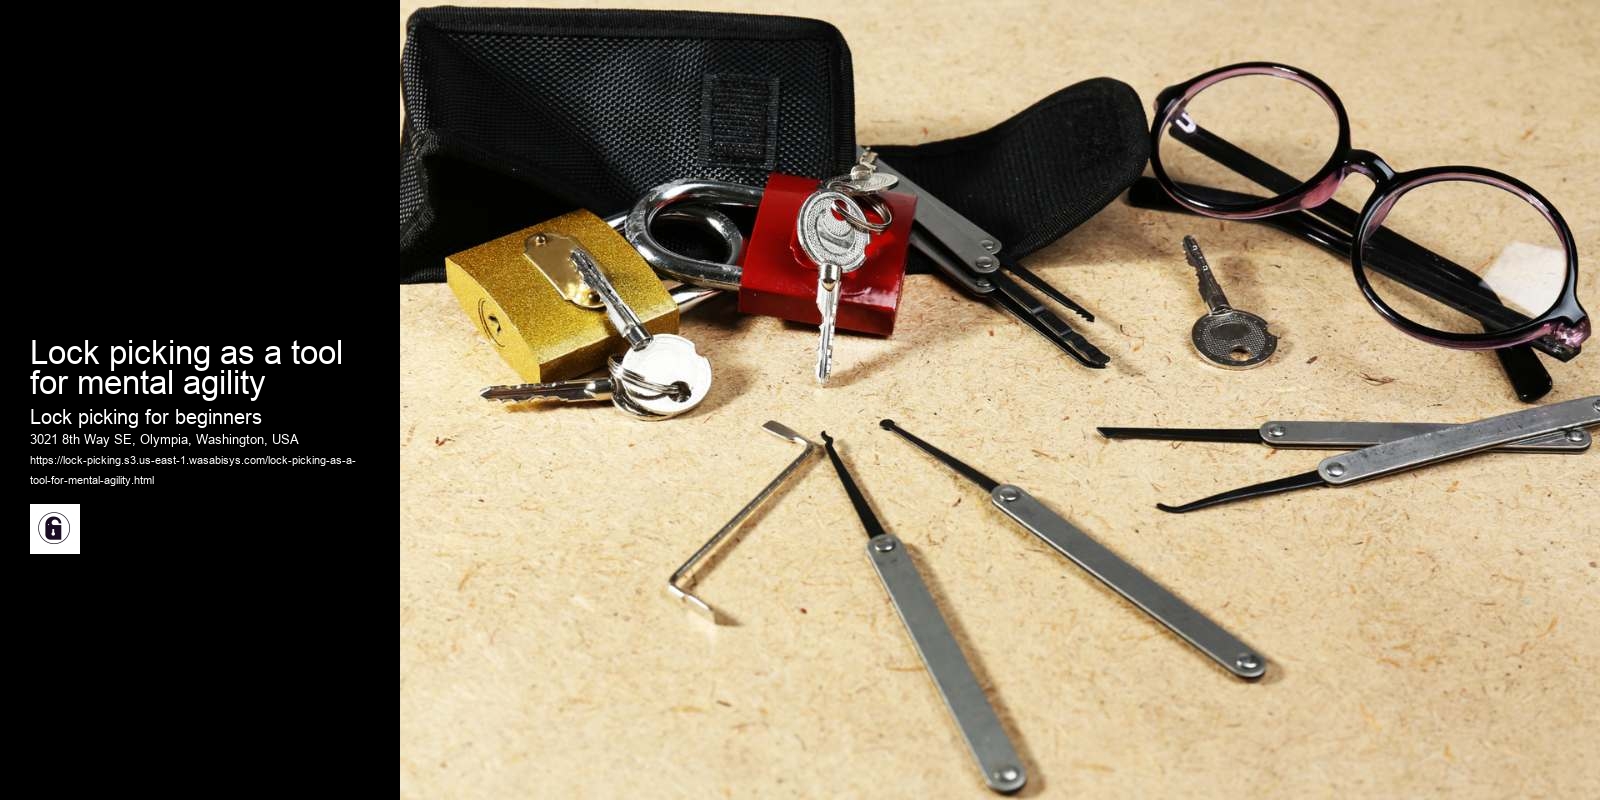 Lock picking as a tool for mental agility